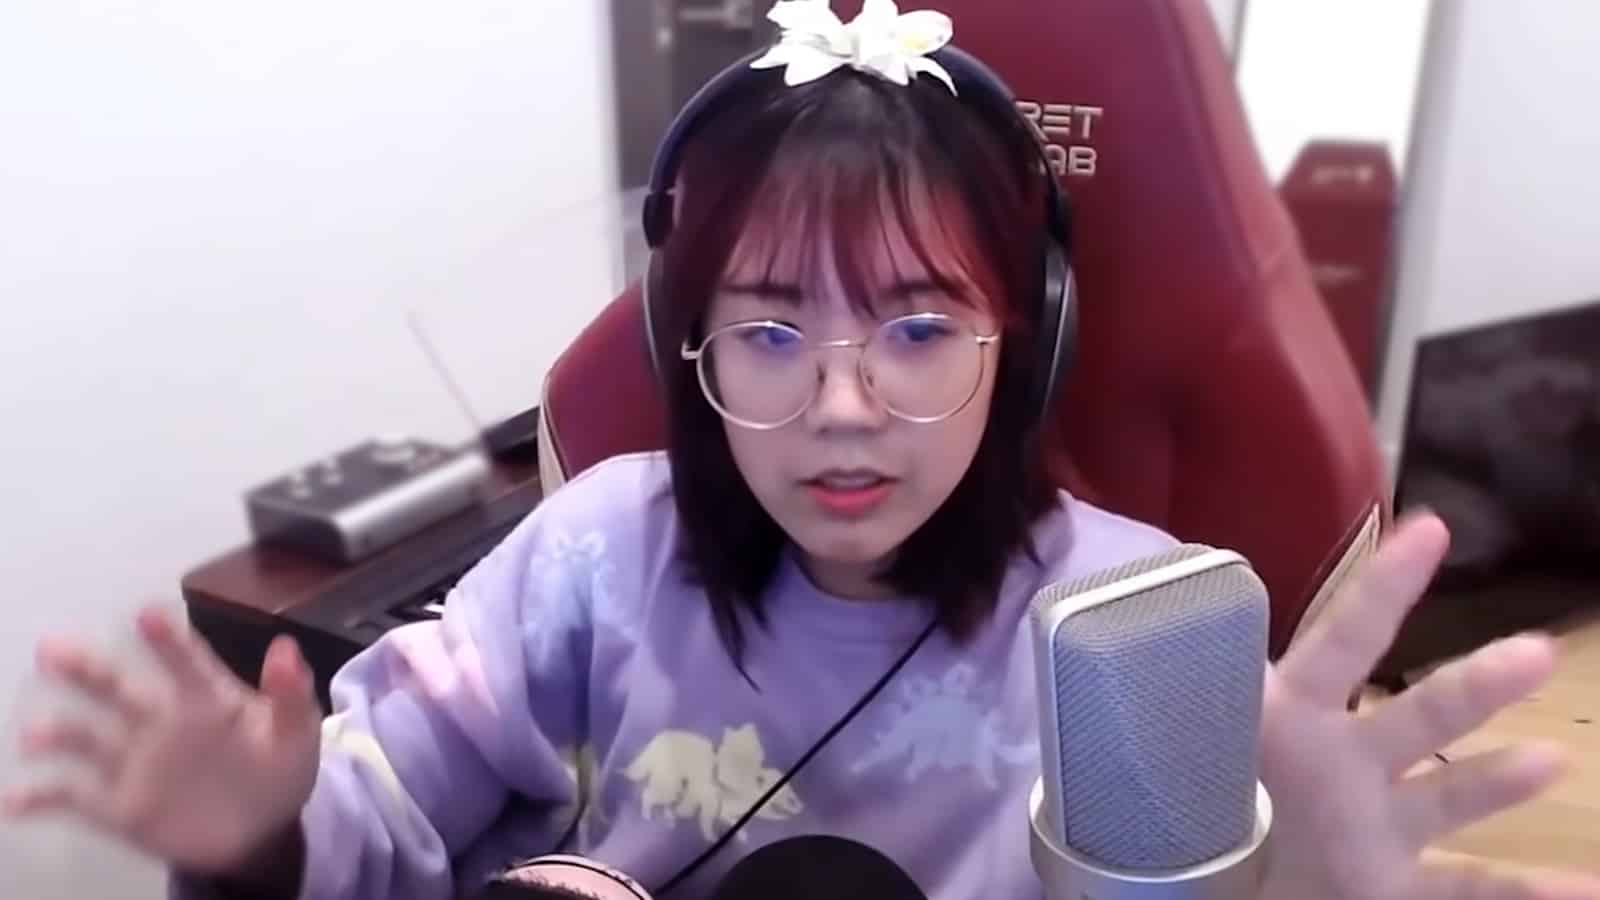 Lilypichu has taken aim at claims female Twitch stars are only popular because of "simps".